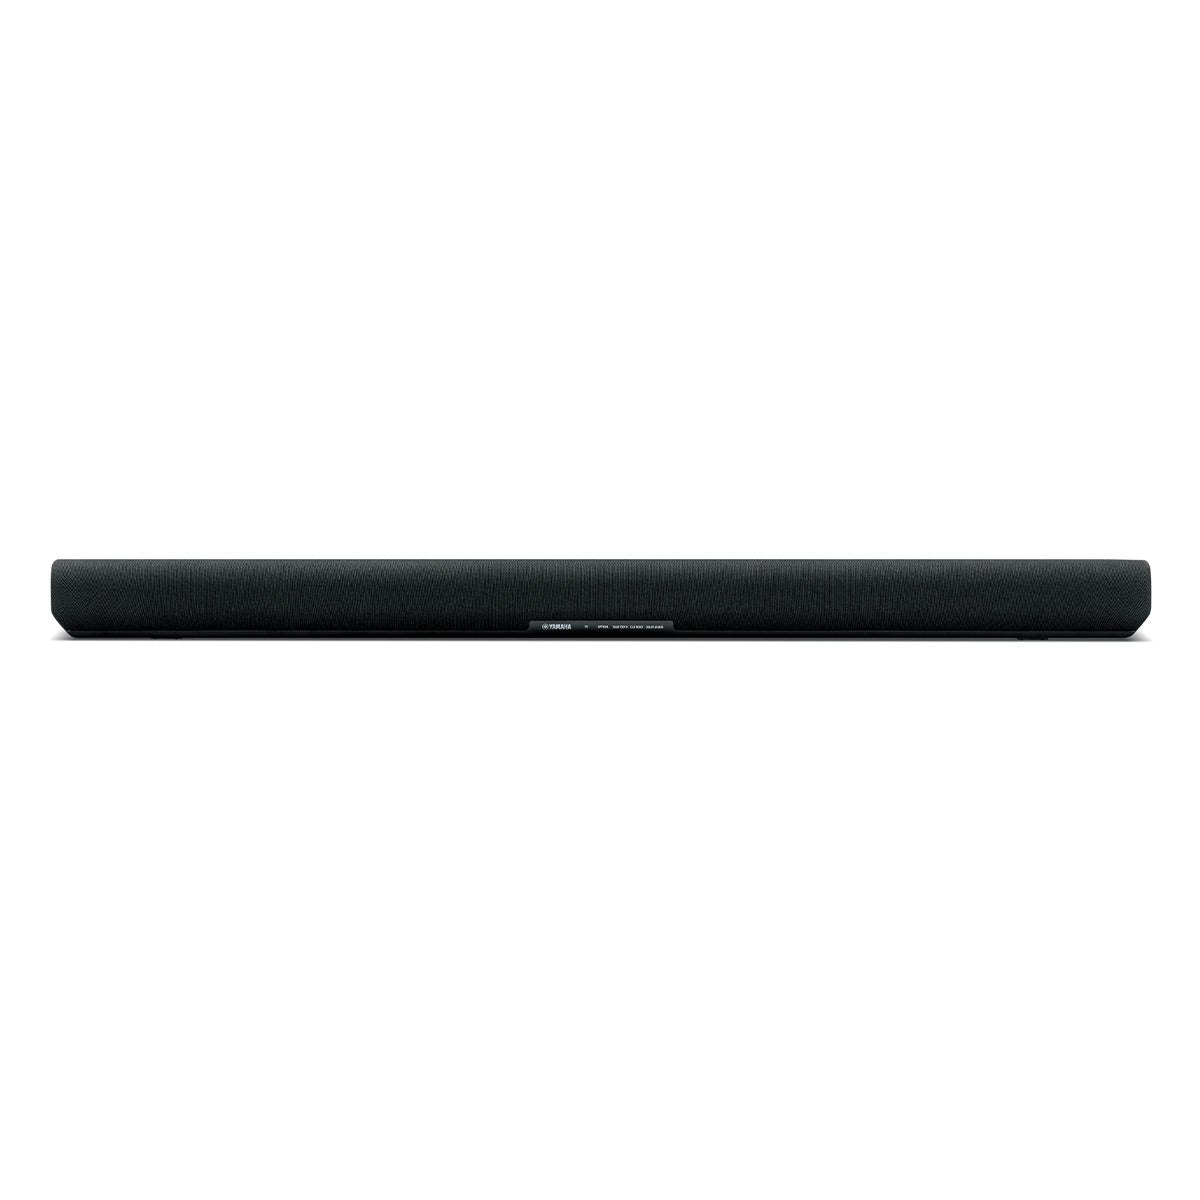 Yamaha SR-B30A Sound Bar with Dolby Atmos & Built-In Subwoofers (Factory Certified Refurbished)